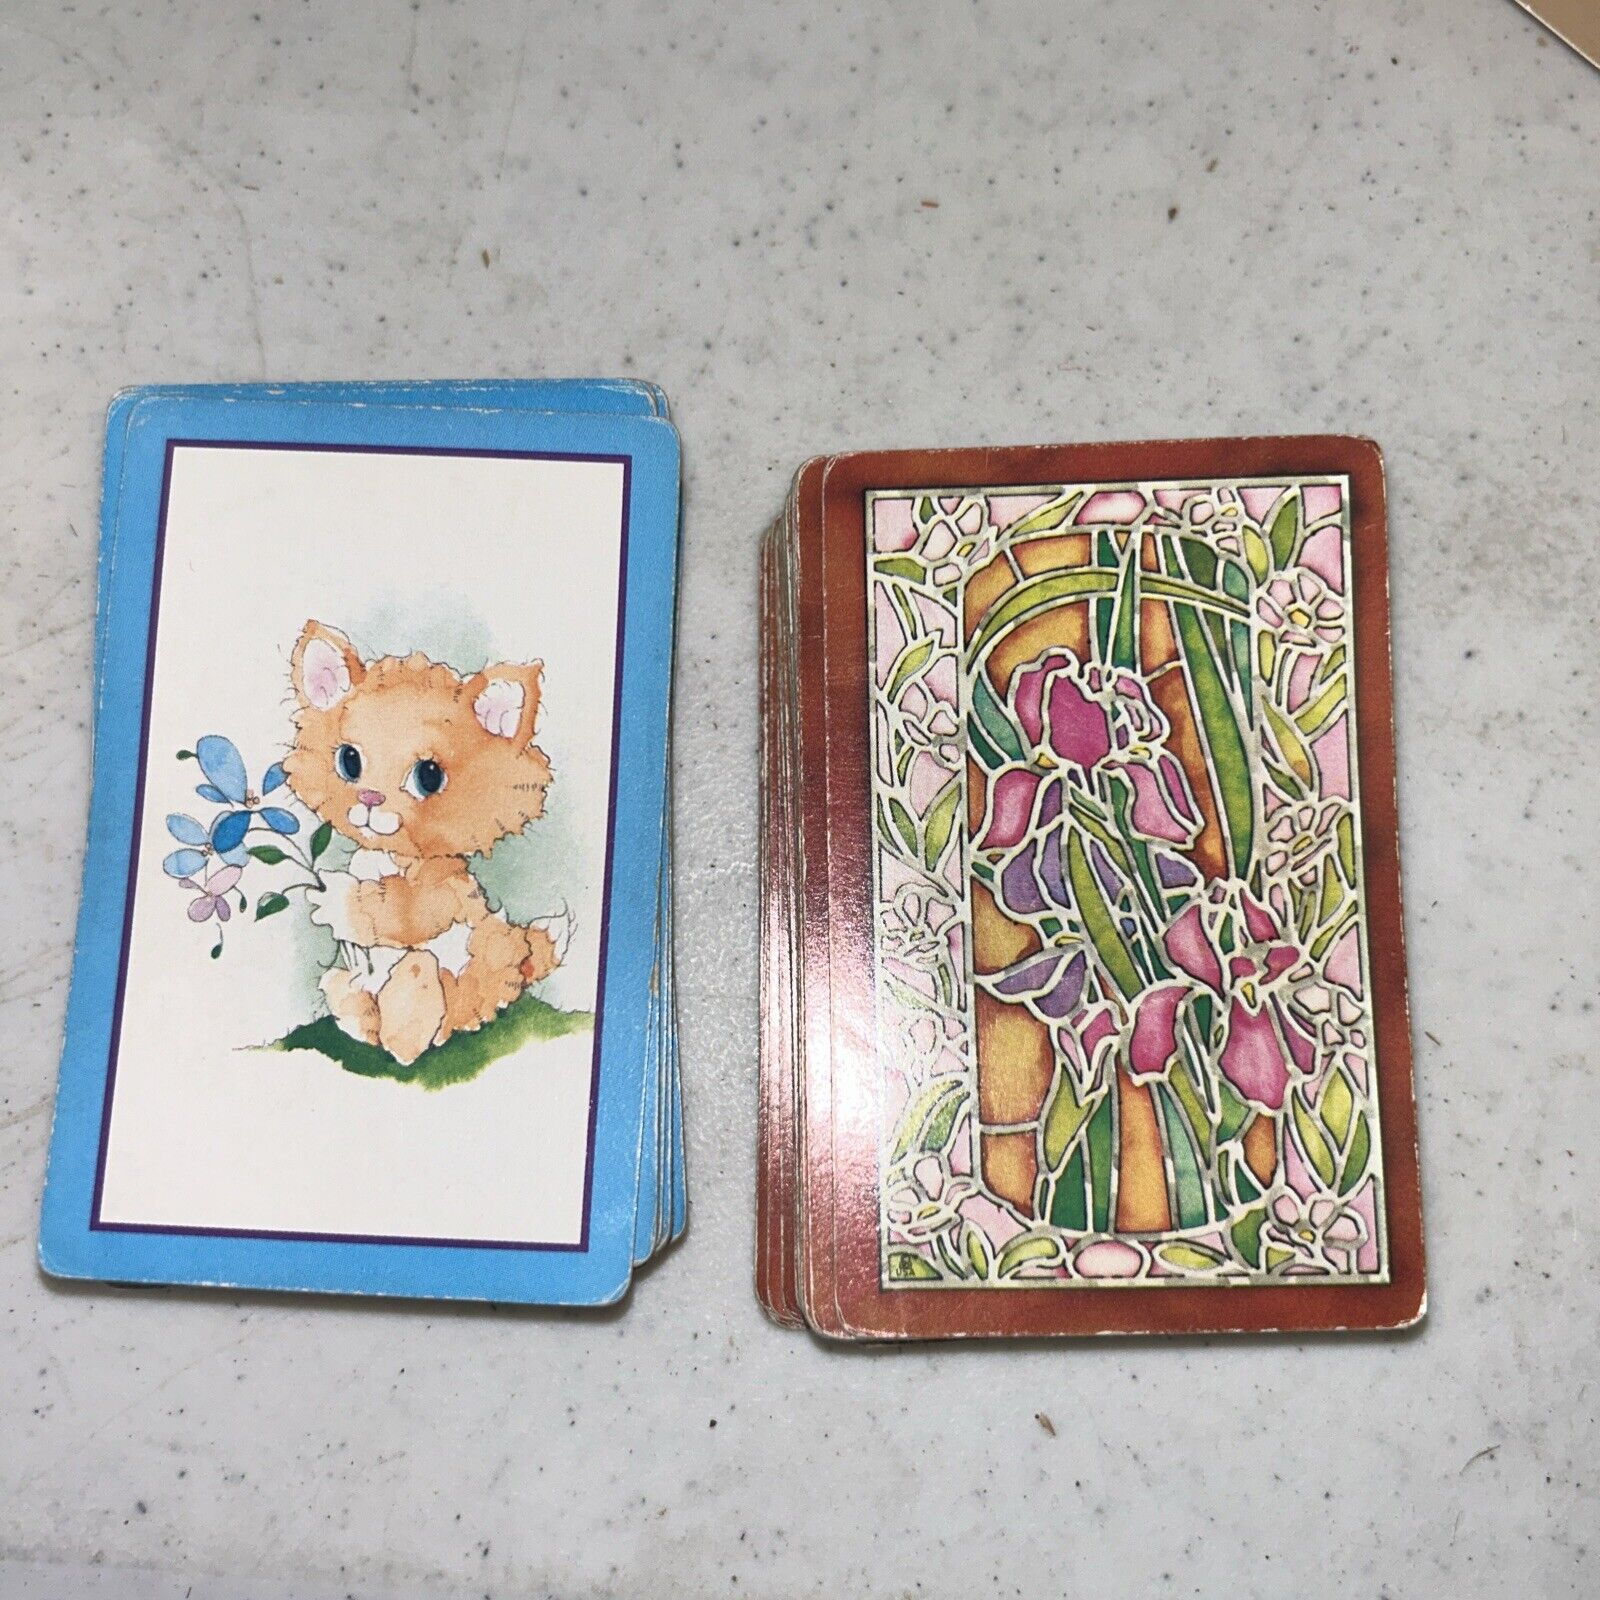 2 Vintage Decks Trump  Playing Cards  CATS  & Floral 52 Cards Each Deck